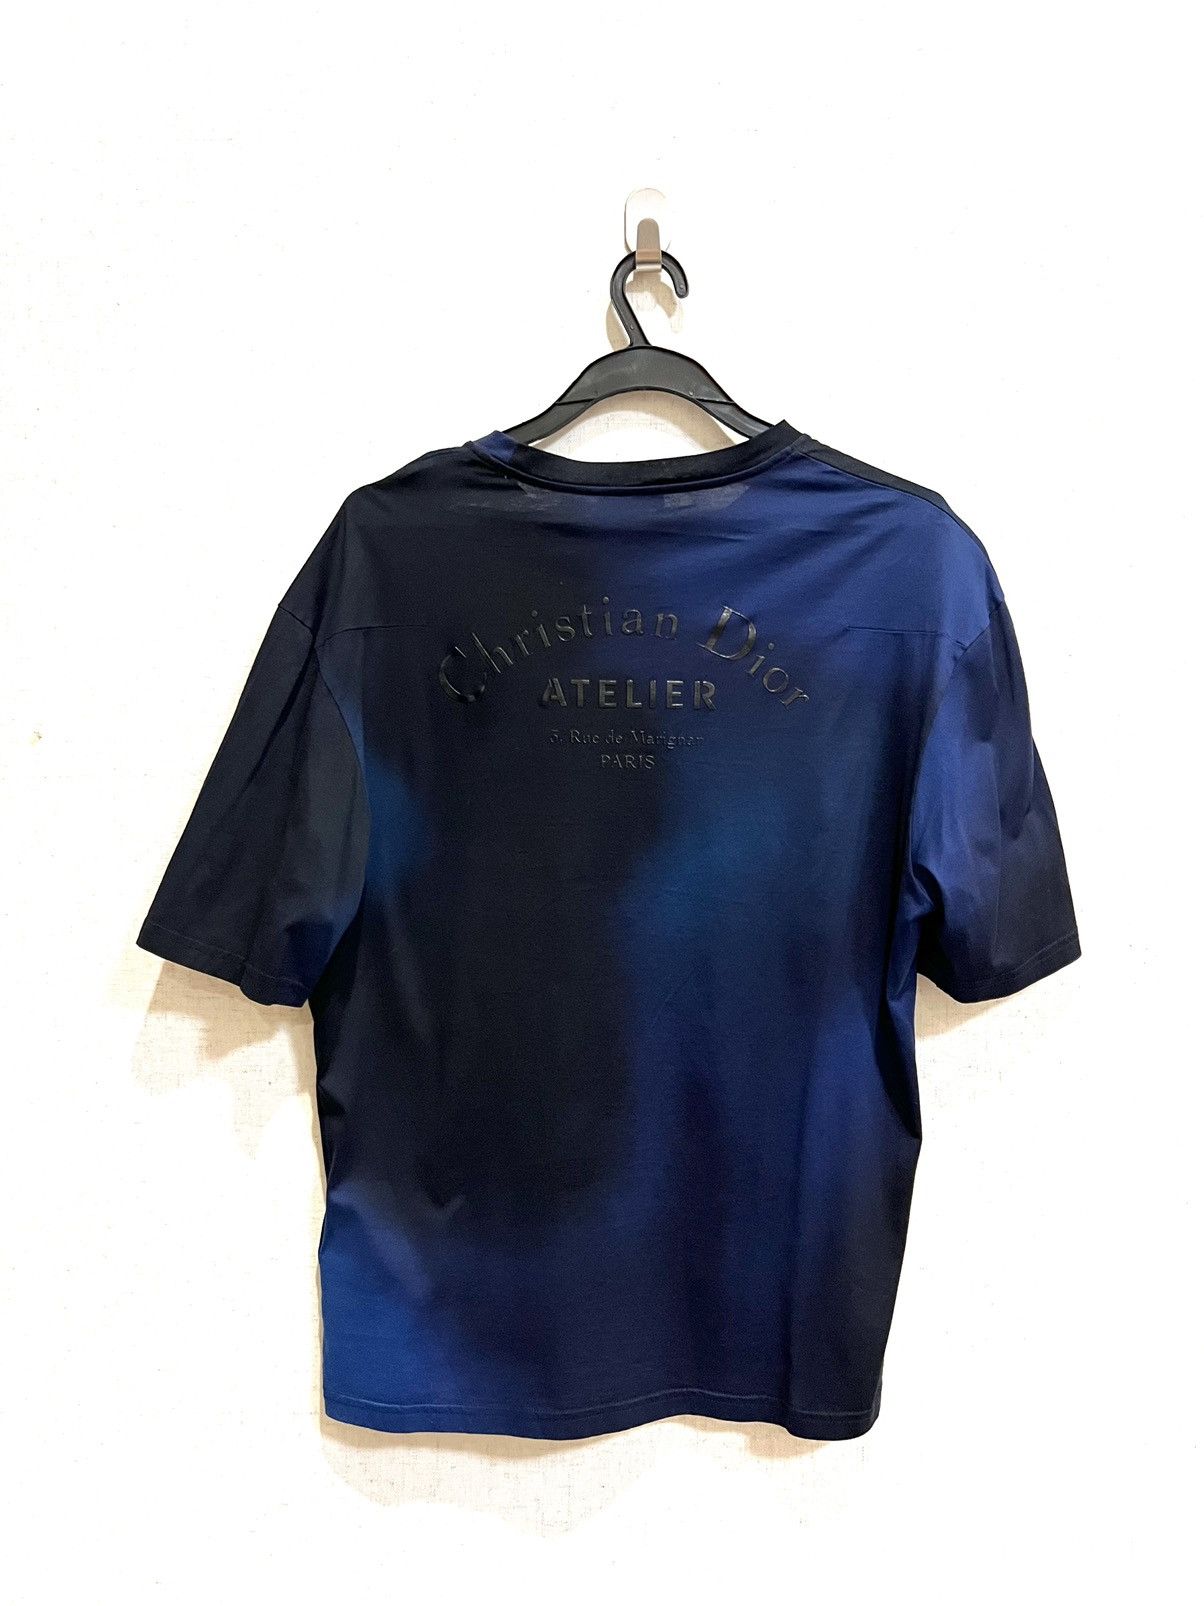 Christian Dior atelier store exclusive tee - 1